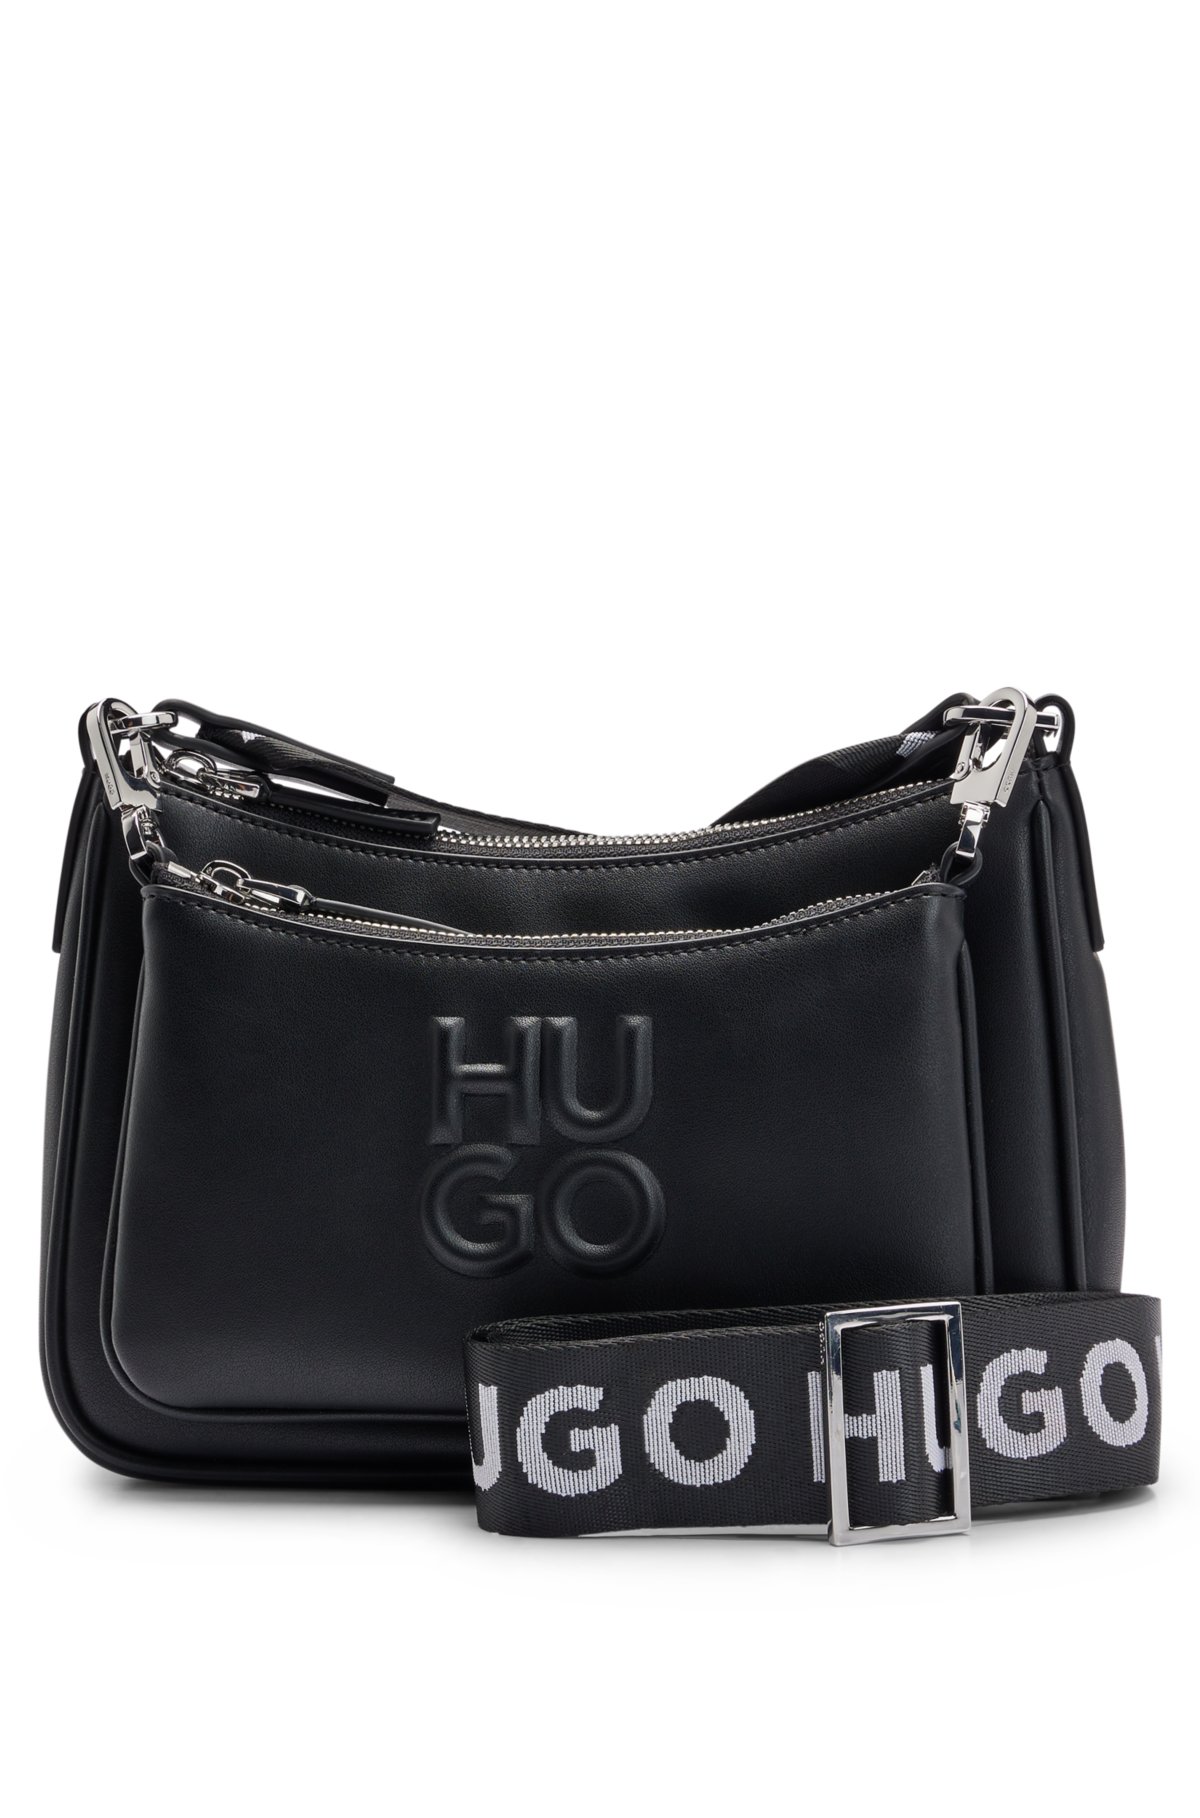 branding - with and Crossbody pouches debossed bag HUGO detachable